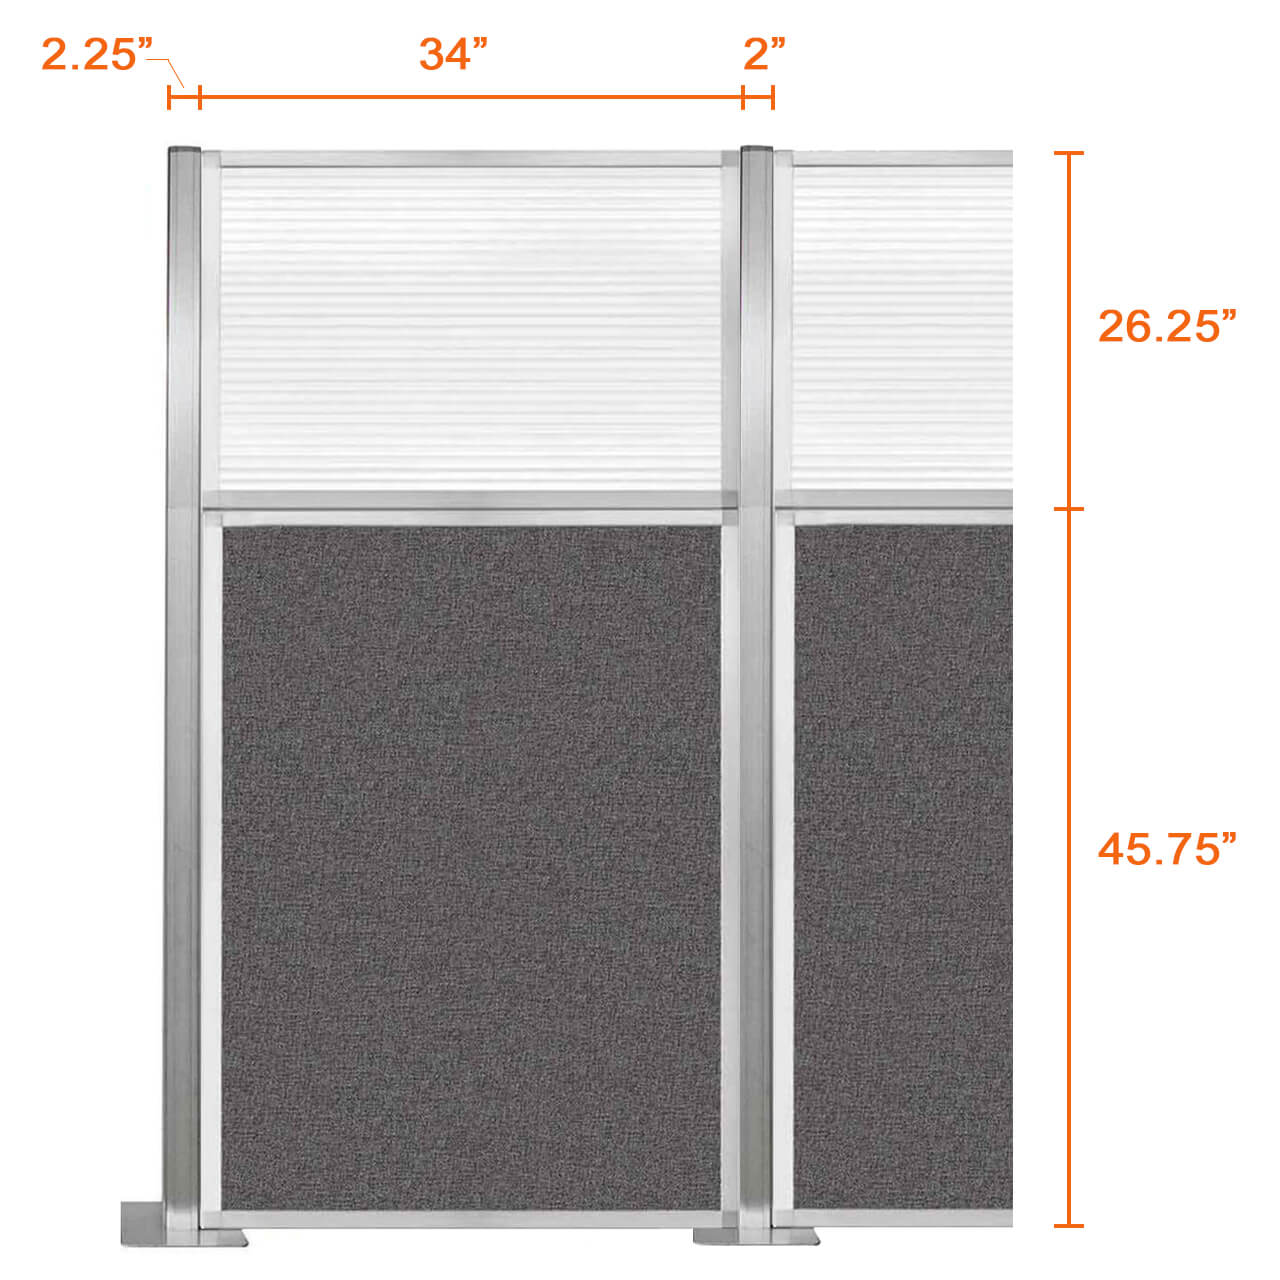 Modular panels 72h x 36w with window measures